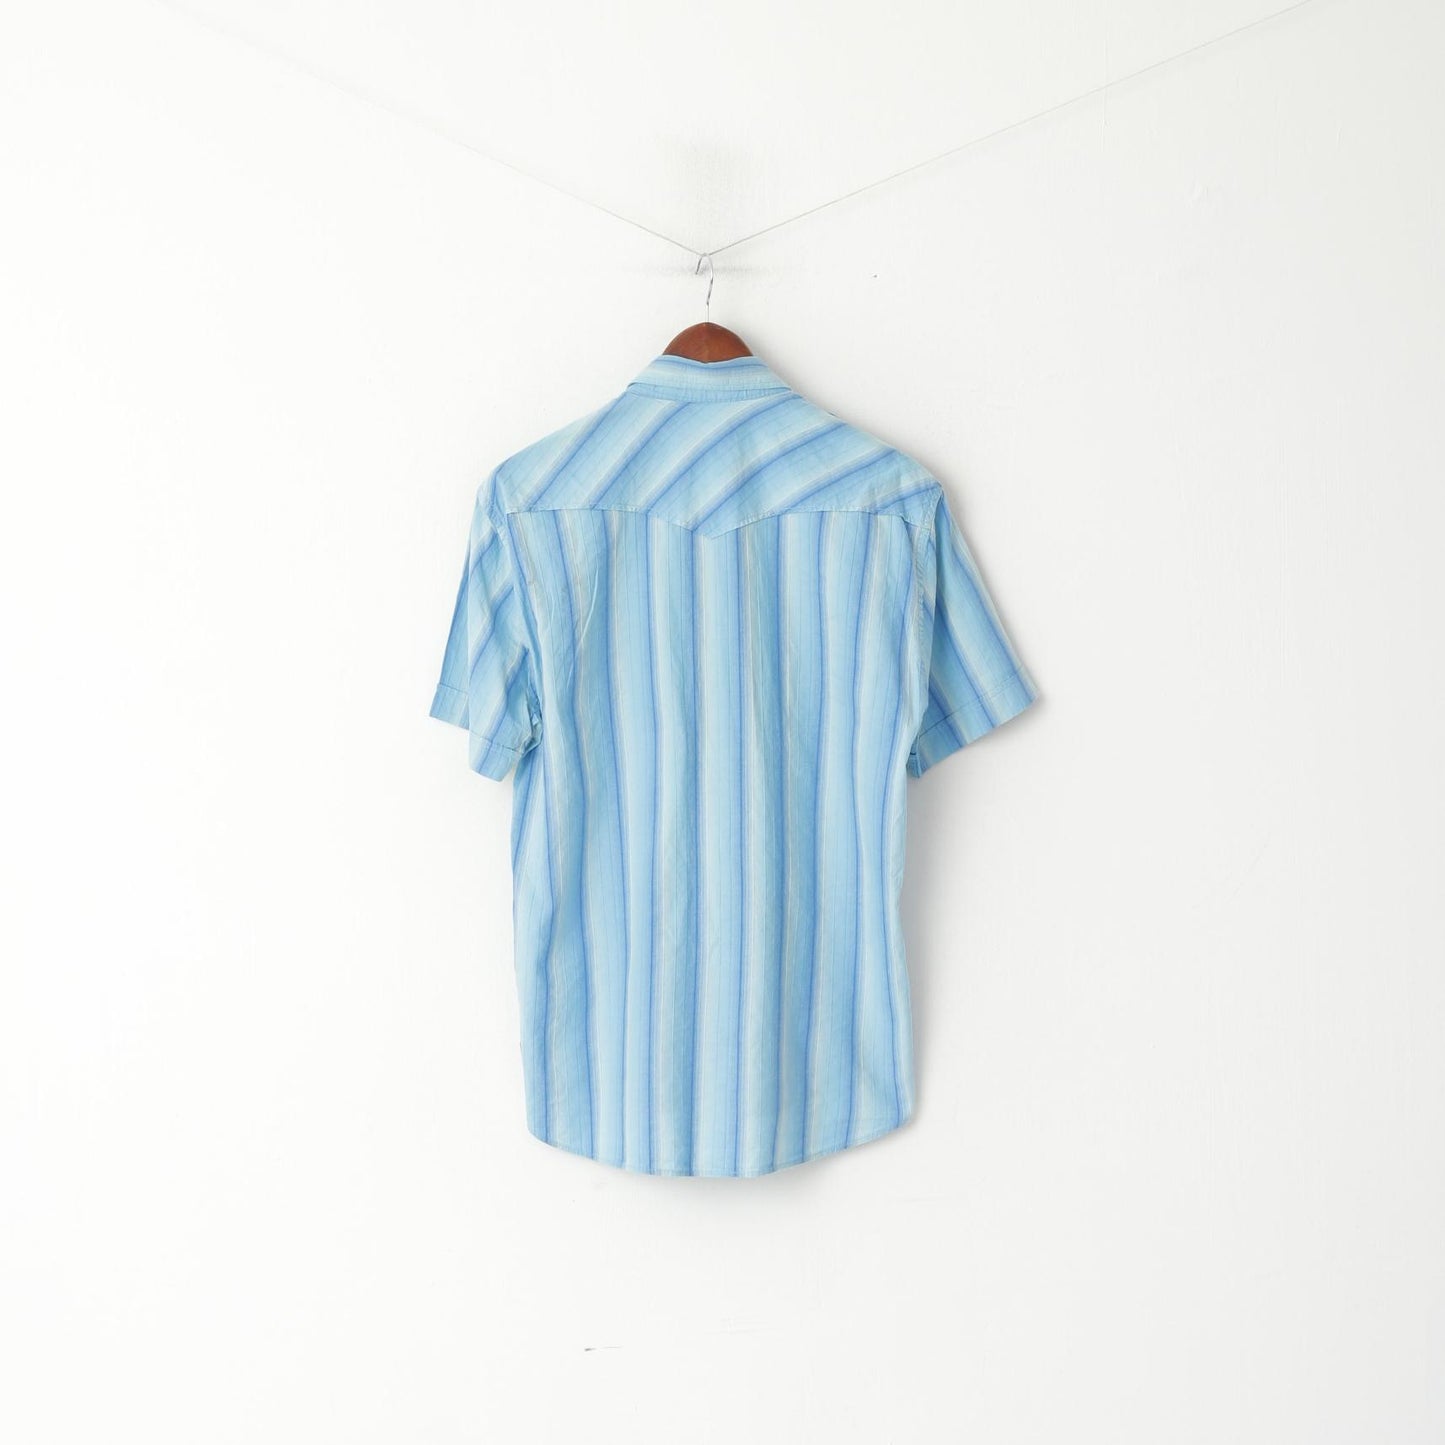 Duck and Cover Men L (M) Casual Shirt Blue Striped Cotton Snap Short Sleeve Retro Top